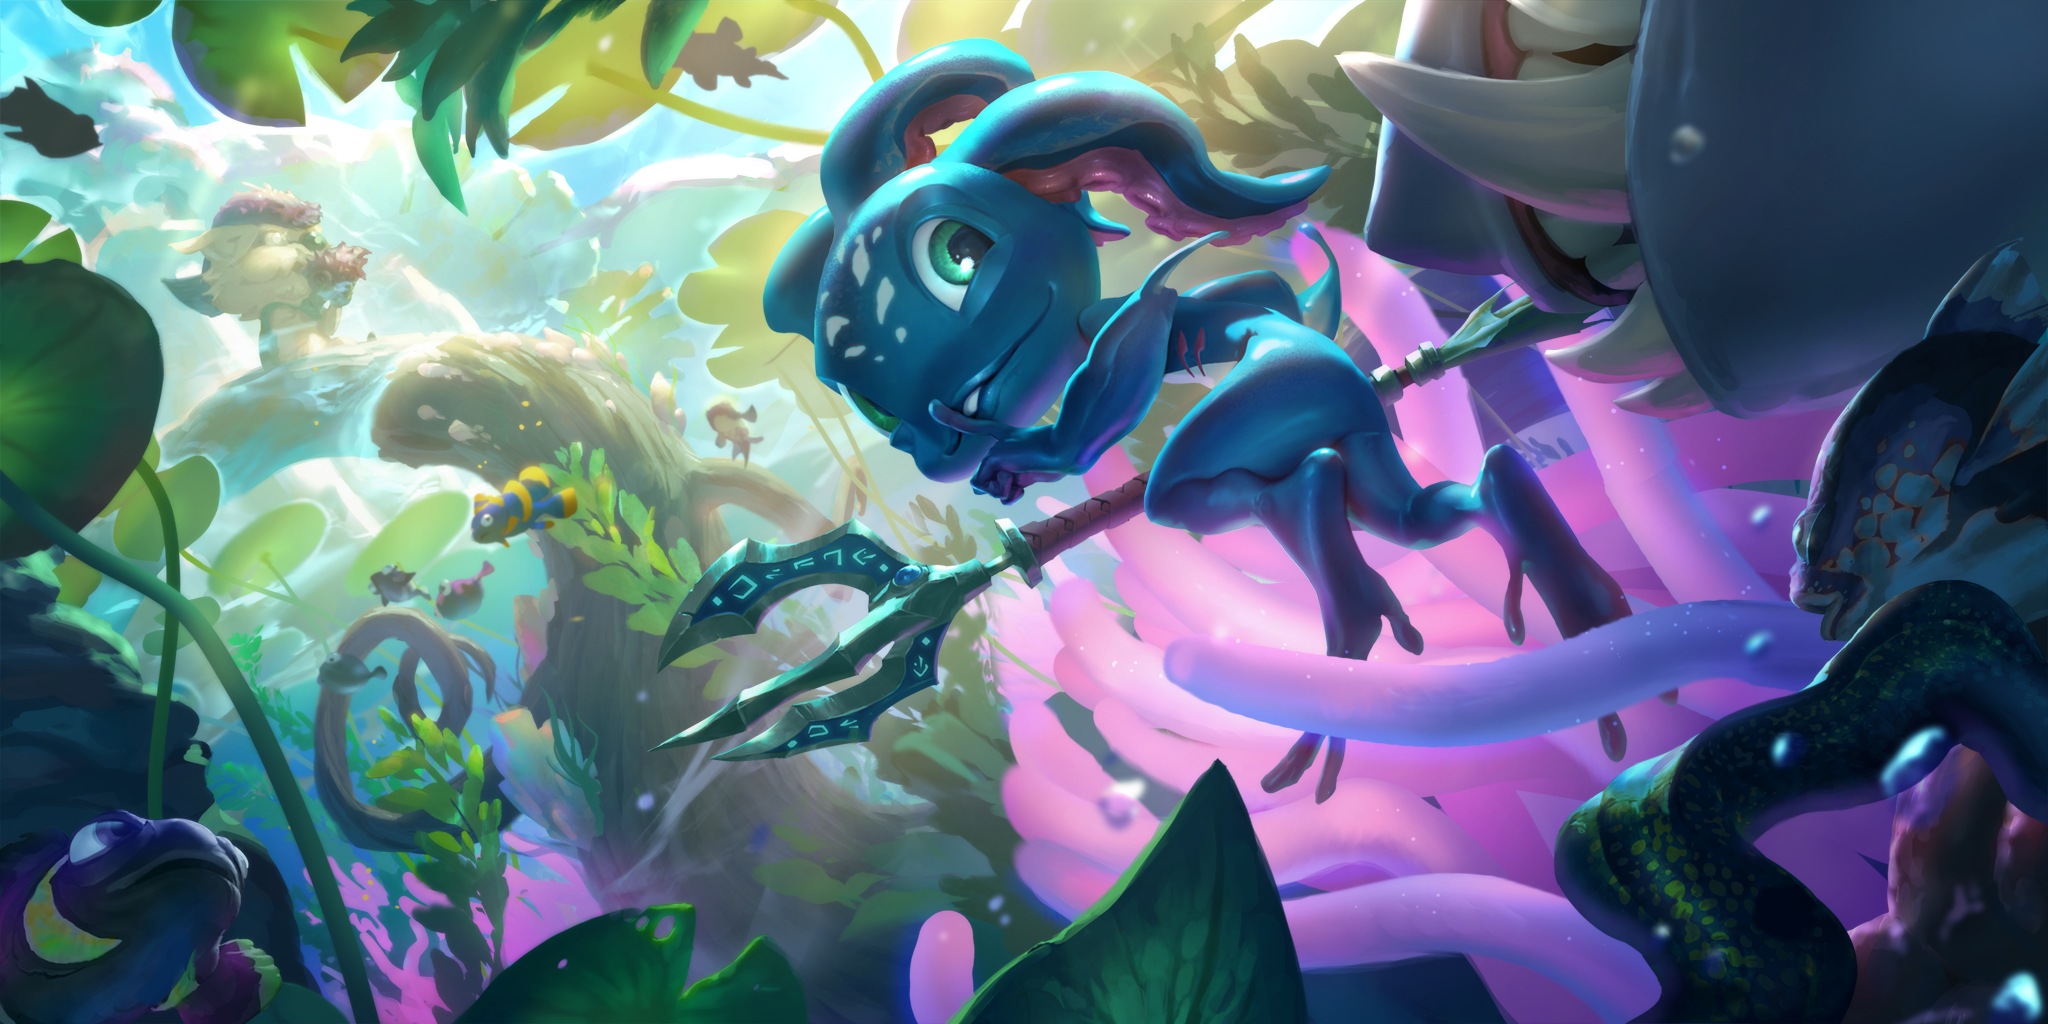 Fizz carries a trident as he swims through colorful coral.